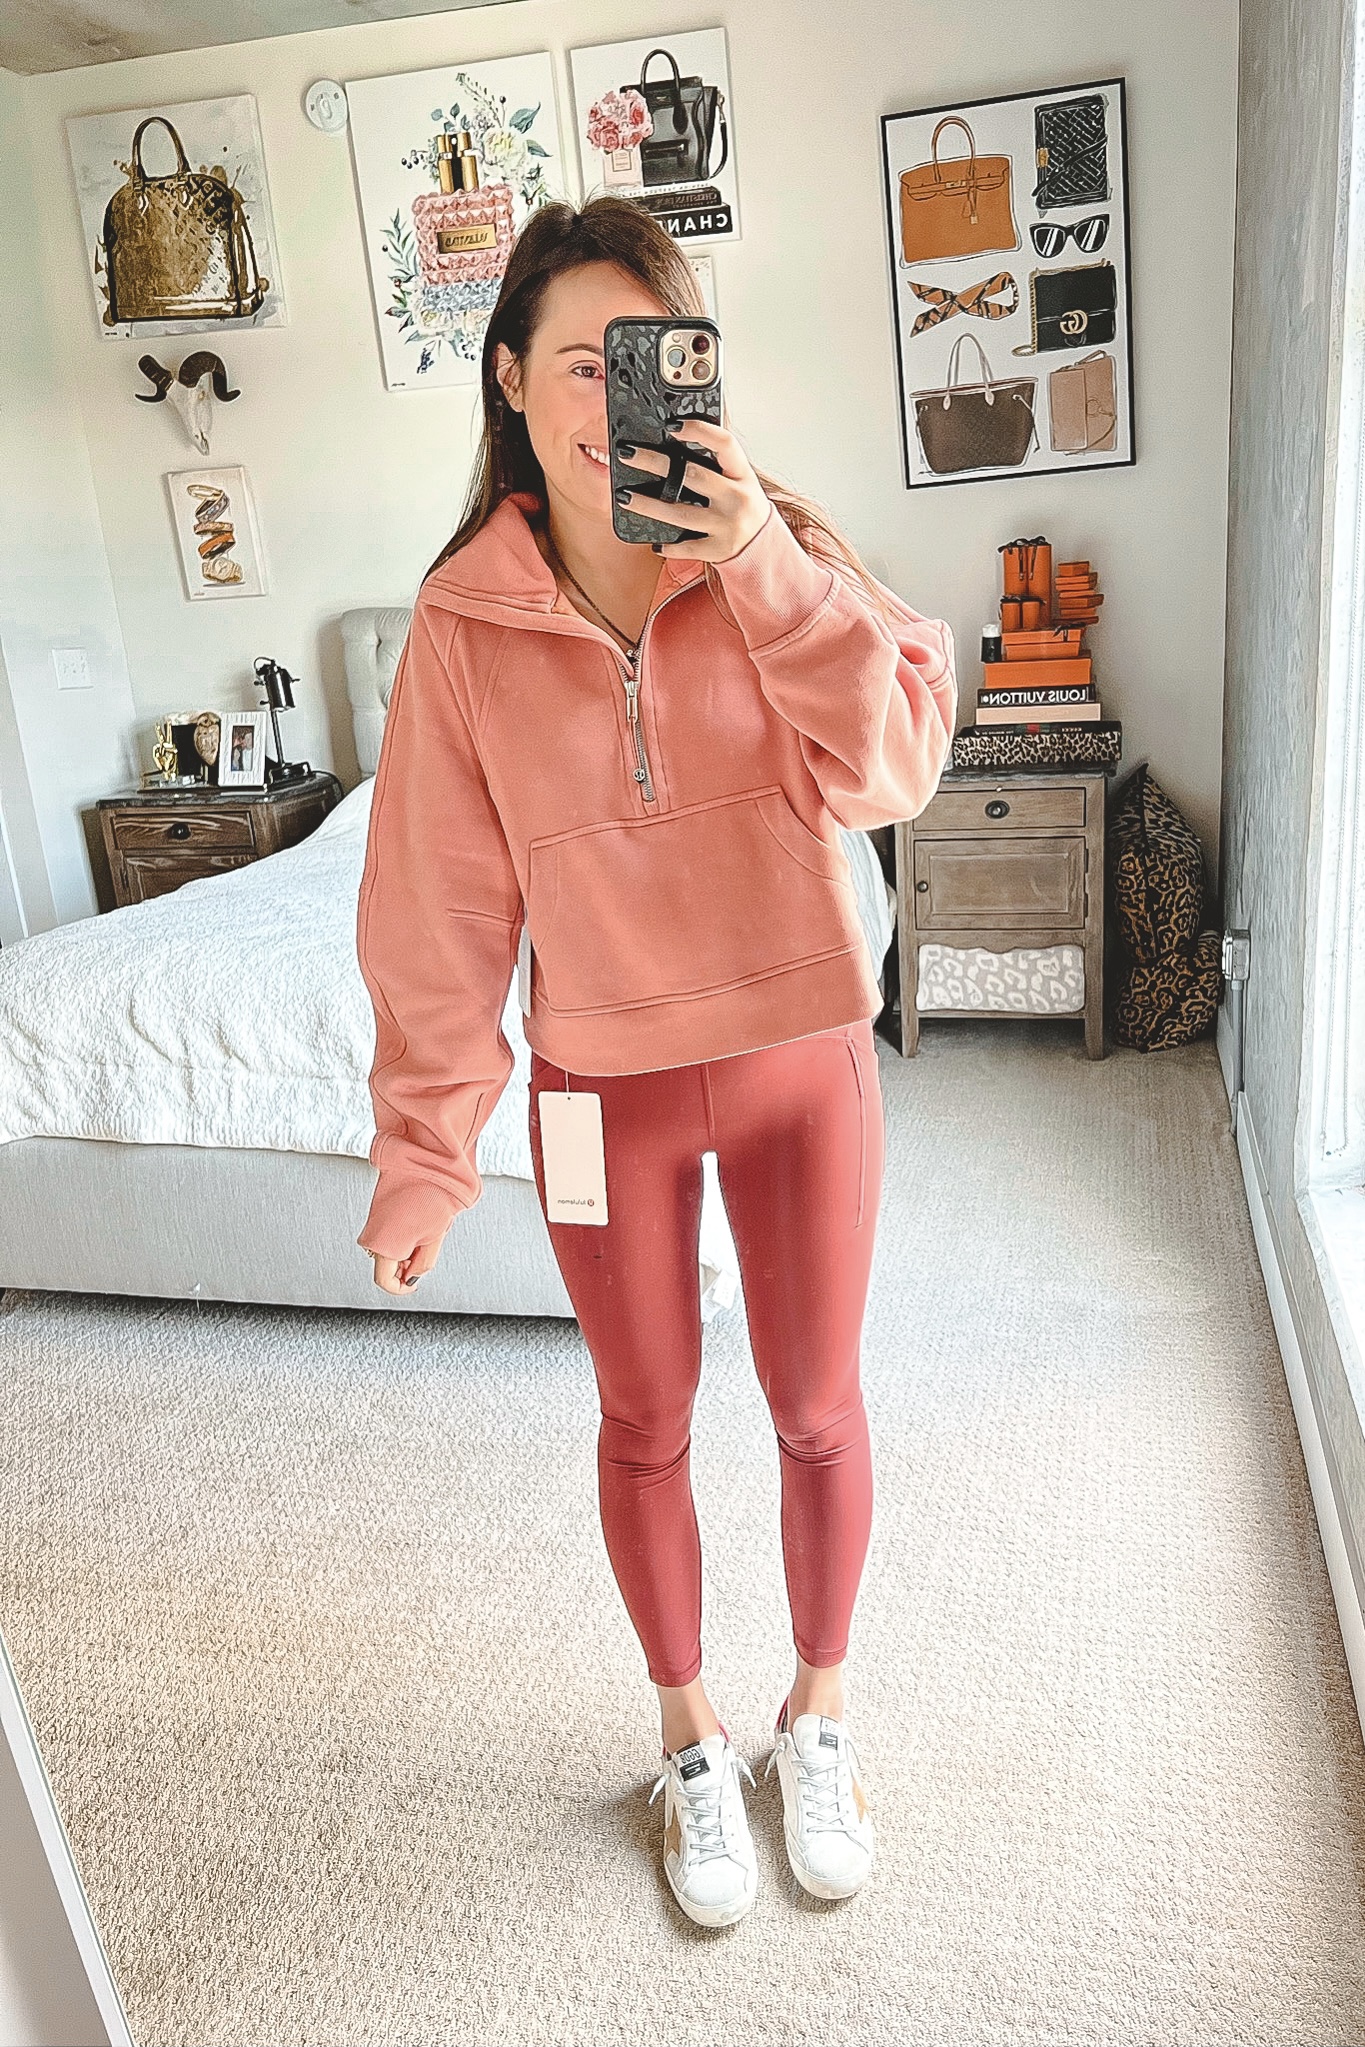 Review! Scuba Hoodie Plush Soft Heathered Cranberry